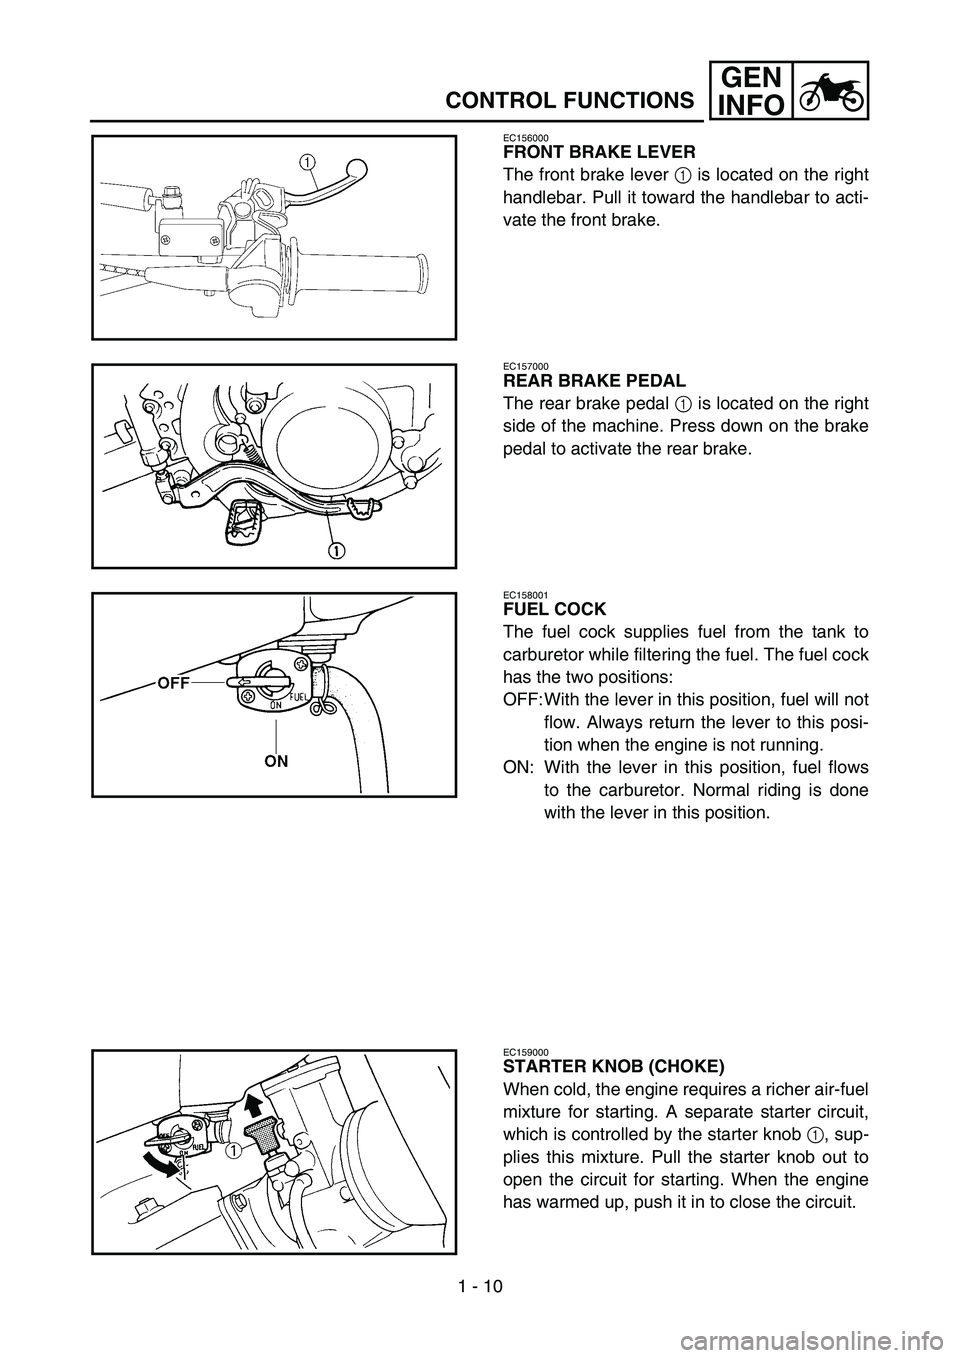 YAMAHA YZ85 2006 Service Manual 1 - 10
GEN
INFO
CONTROL FUNCTIONS
EC156000
FRONT BRAKE LEVER
The front brake lever 1 is located on the right
handlebar. Pull it toward the handlebar to acti-
vate the front brake.
5PAR0002
EC157000
RE